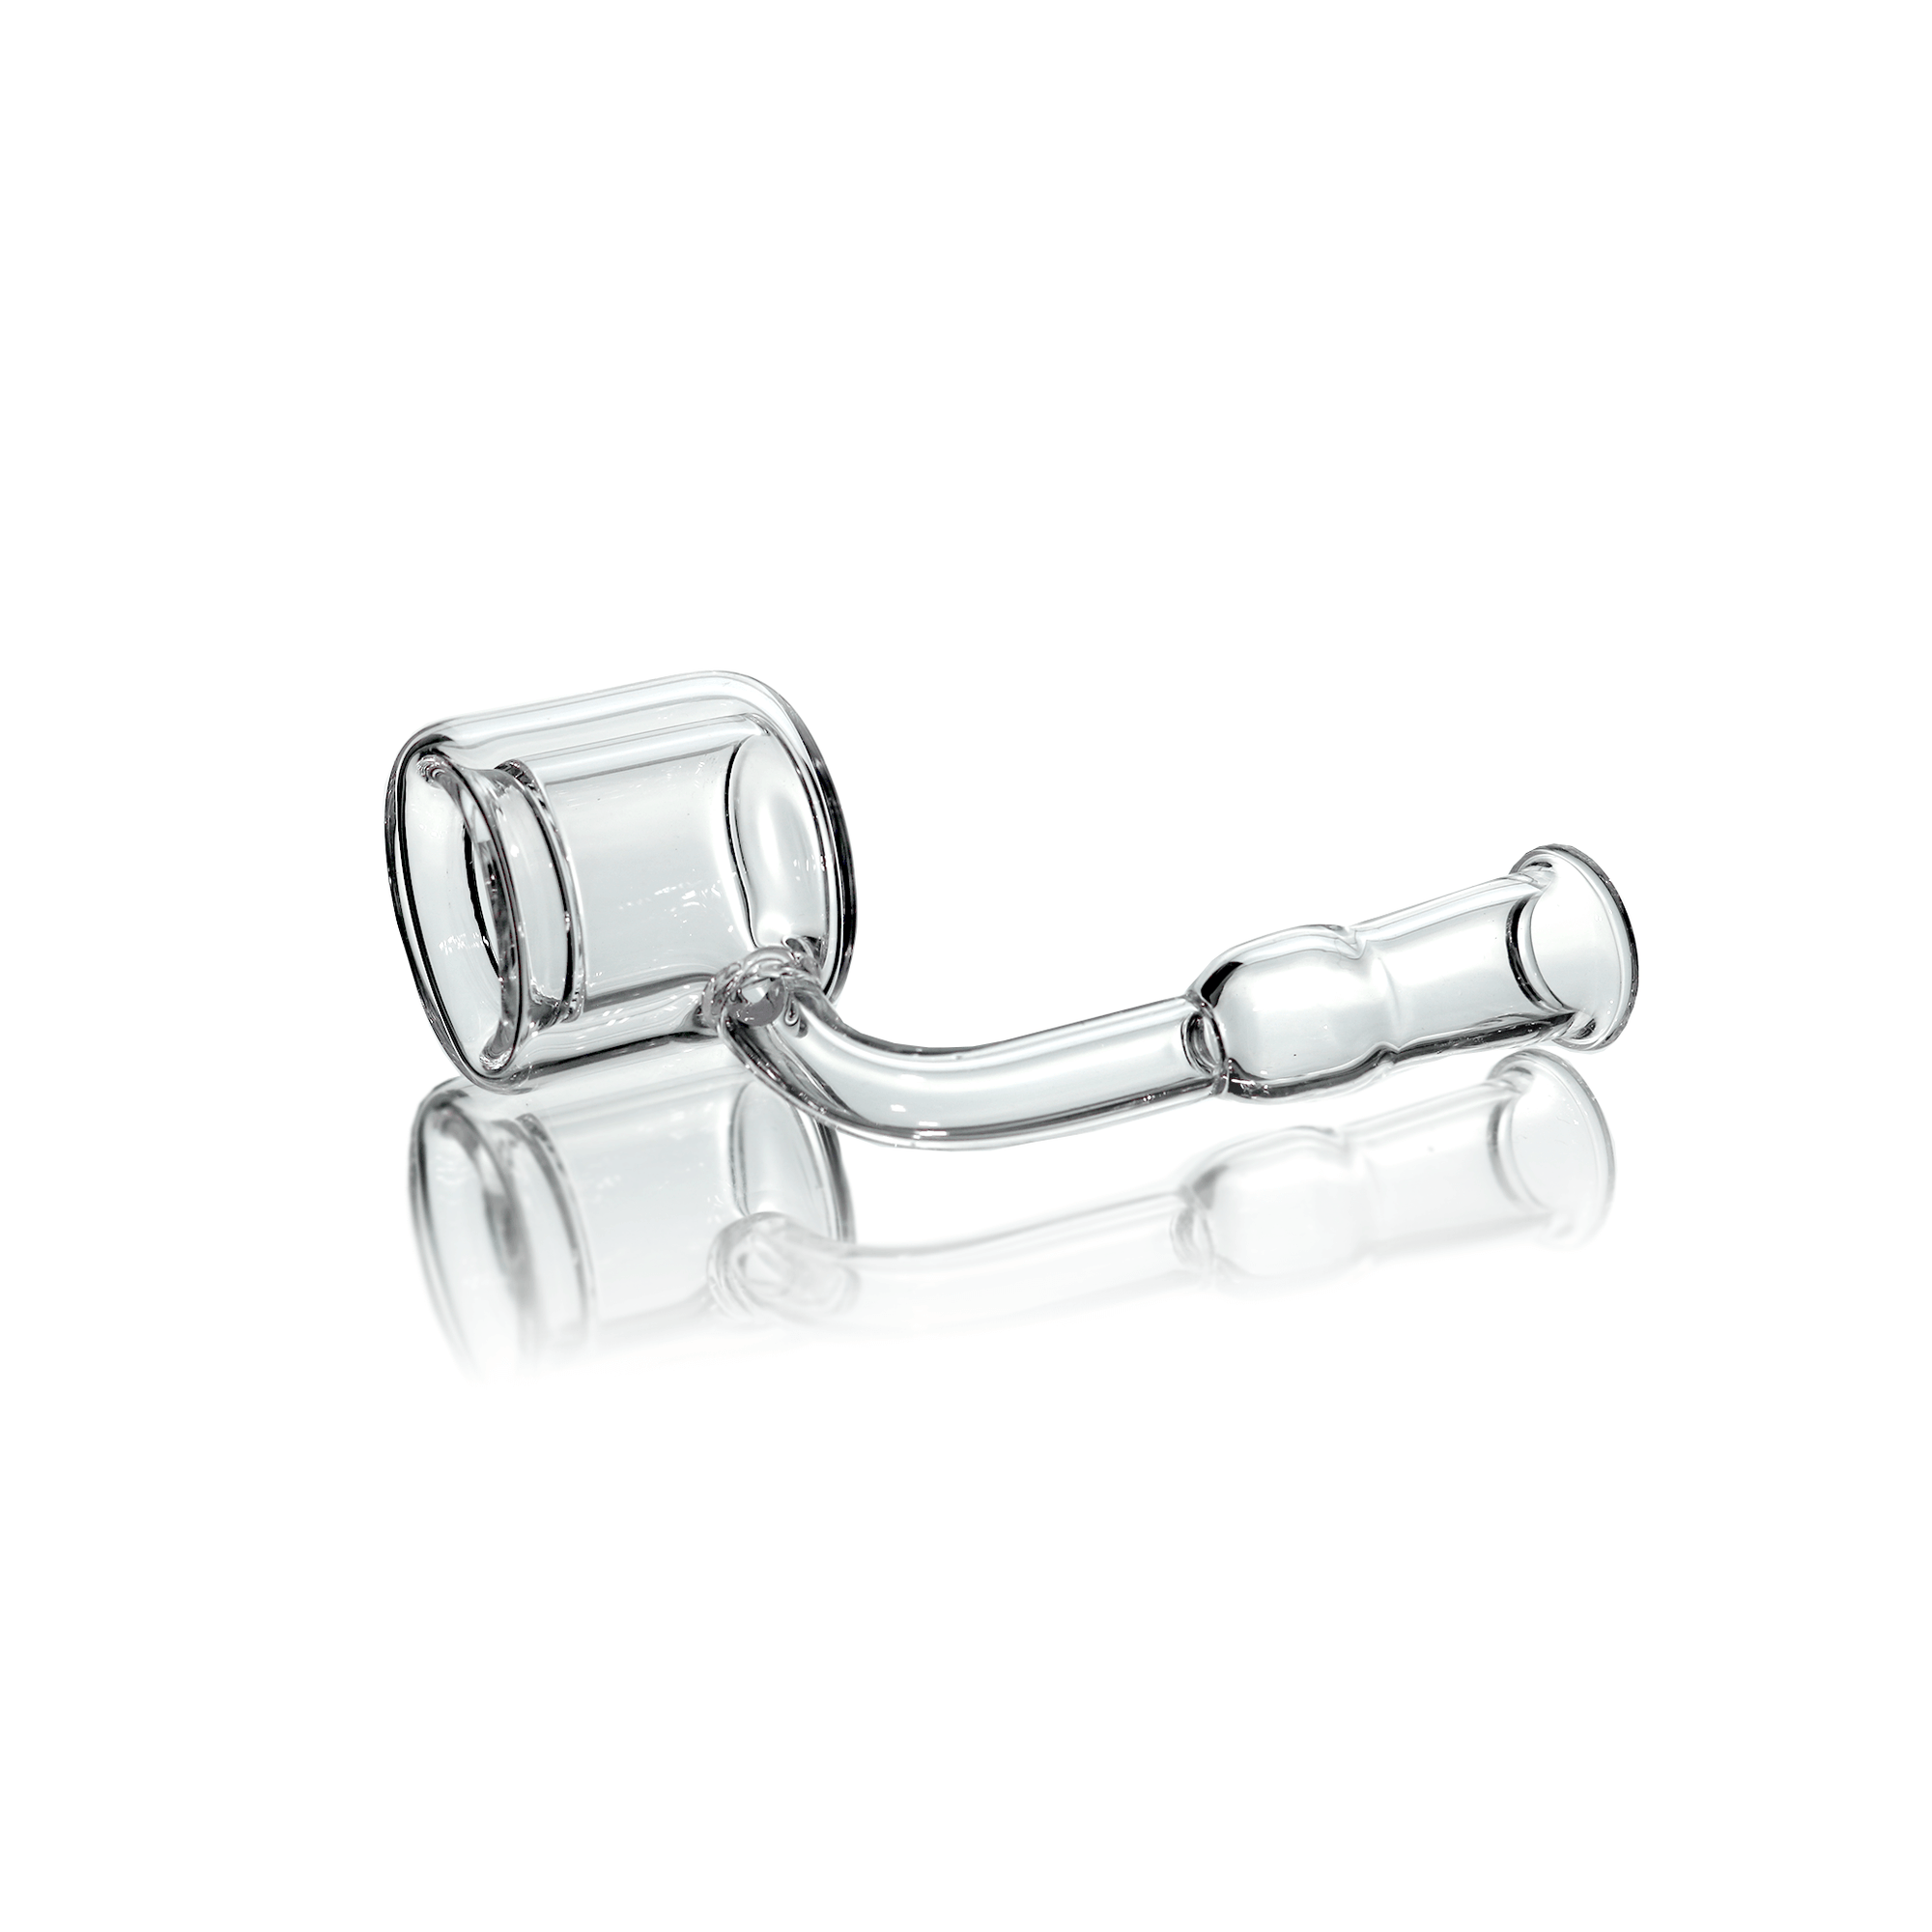 Quartz Double Wall Banger (Torch) | 10mm Female | Alternate View | the dabbing specialists